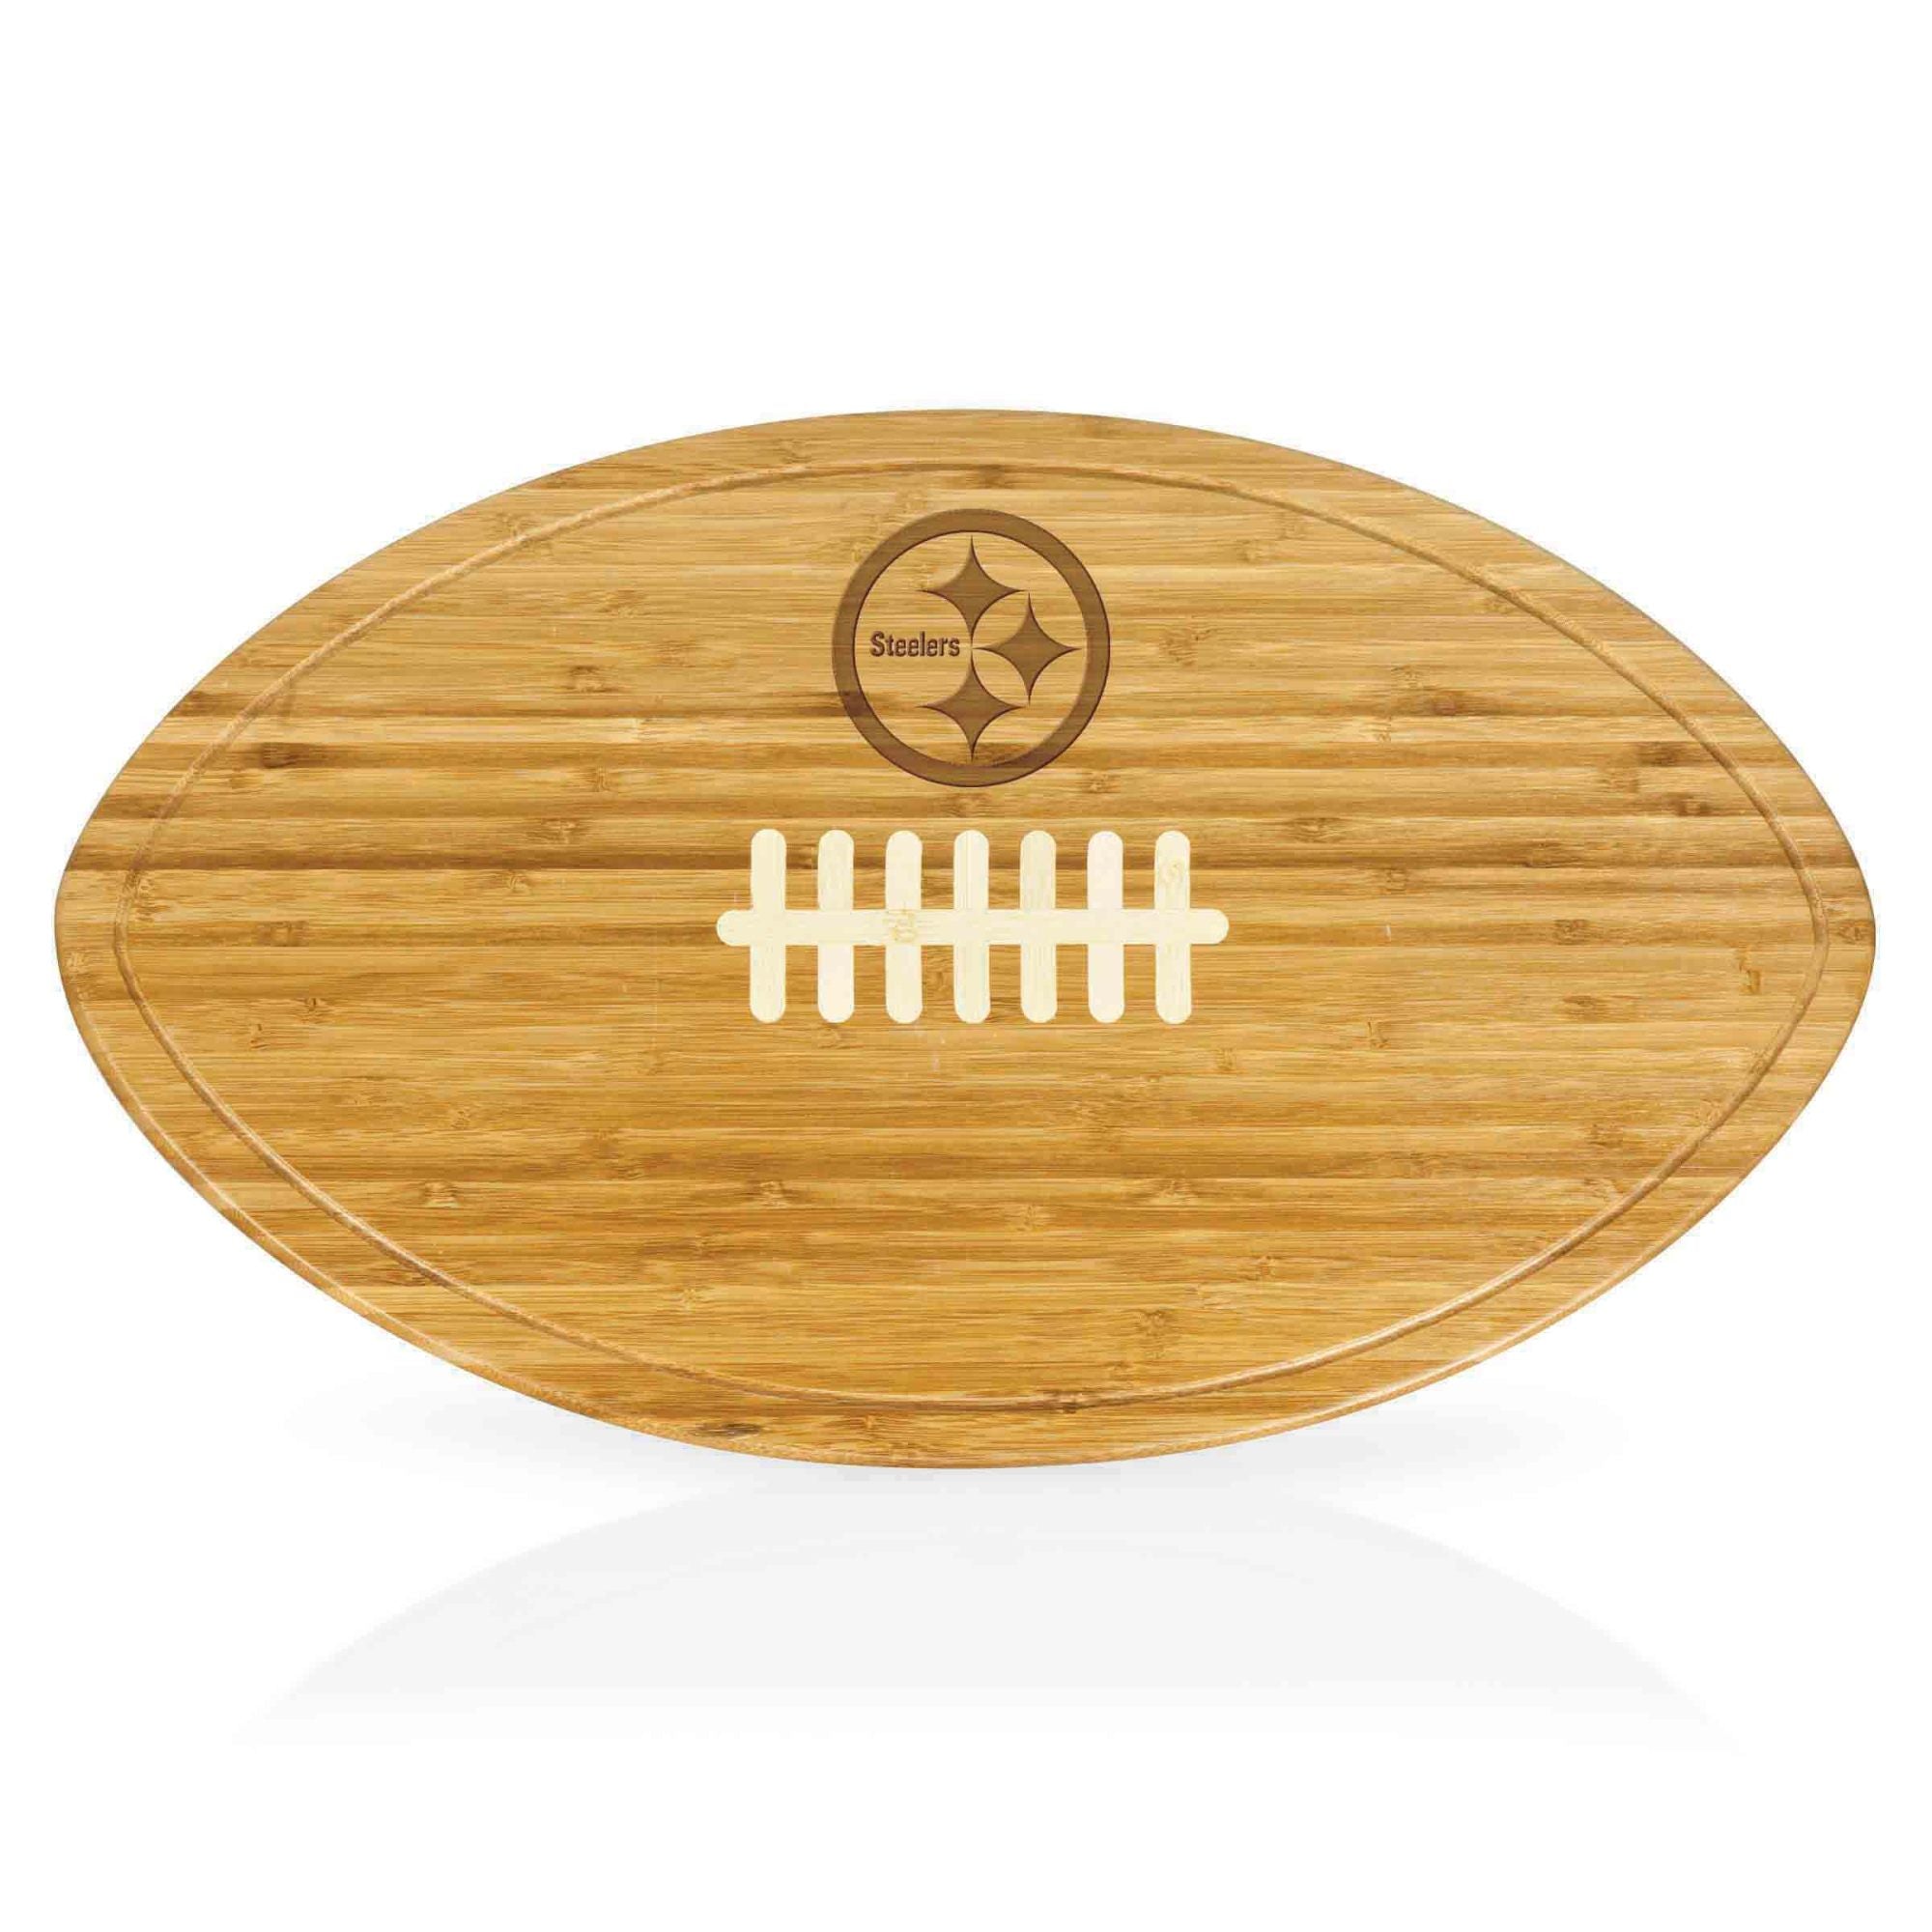 Pittsburgh Steelers - Kickoff Football Cutting Board & Serving Tray